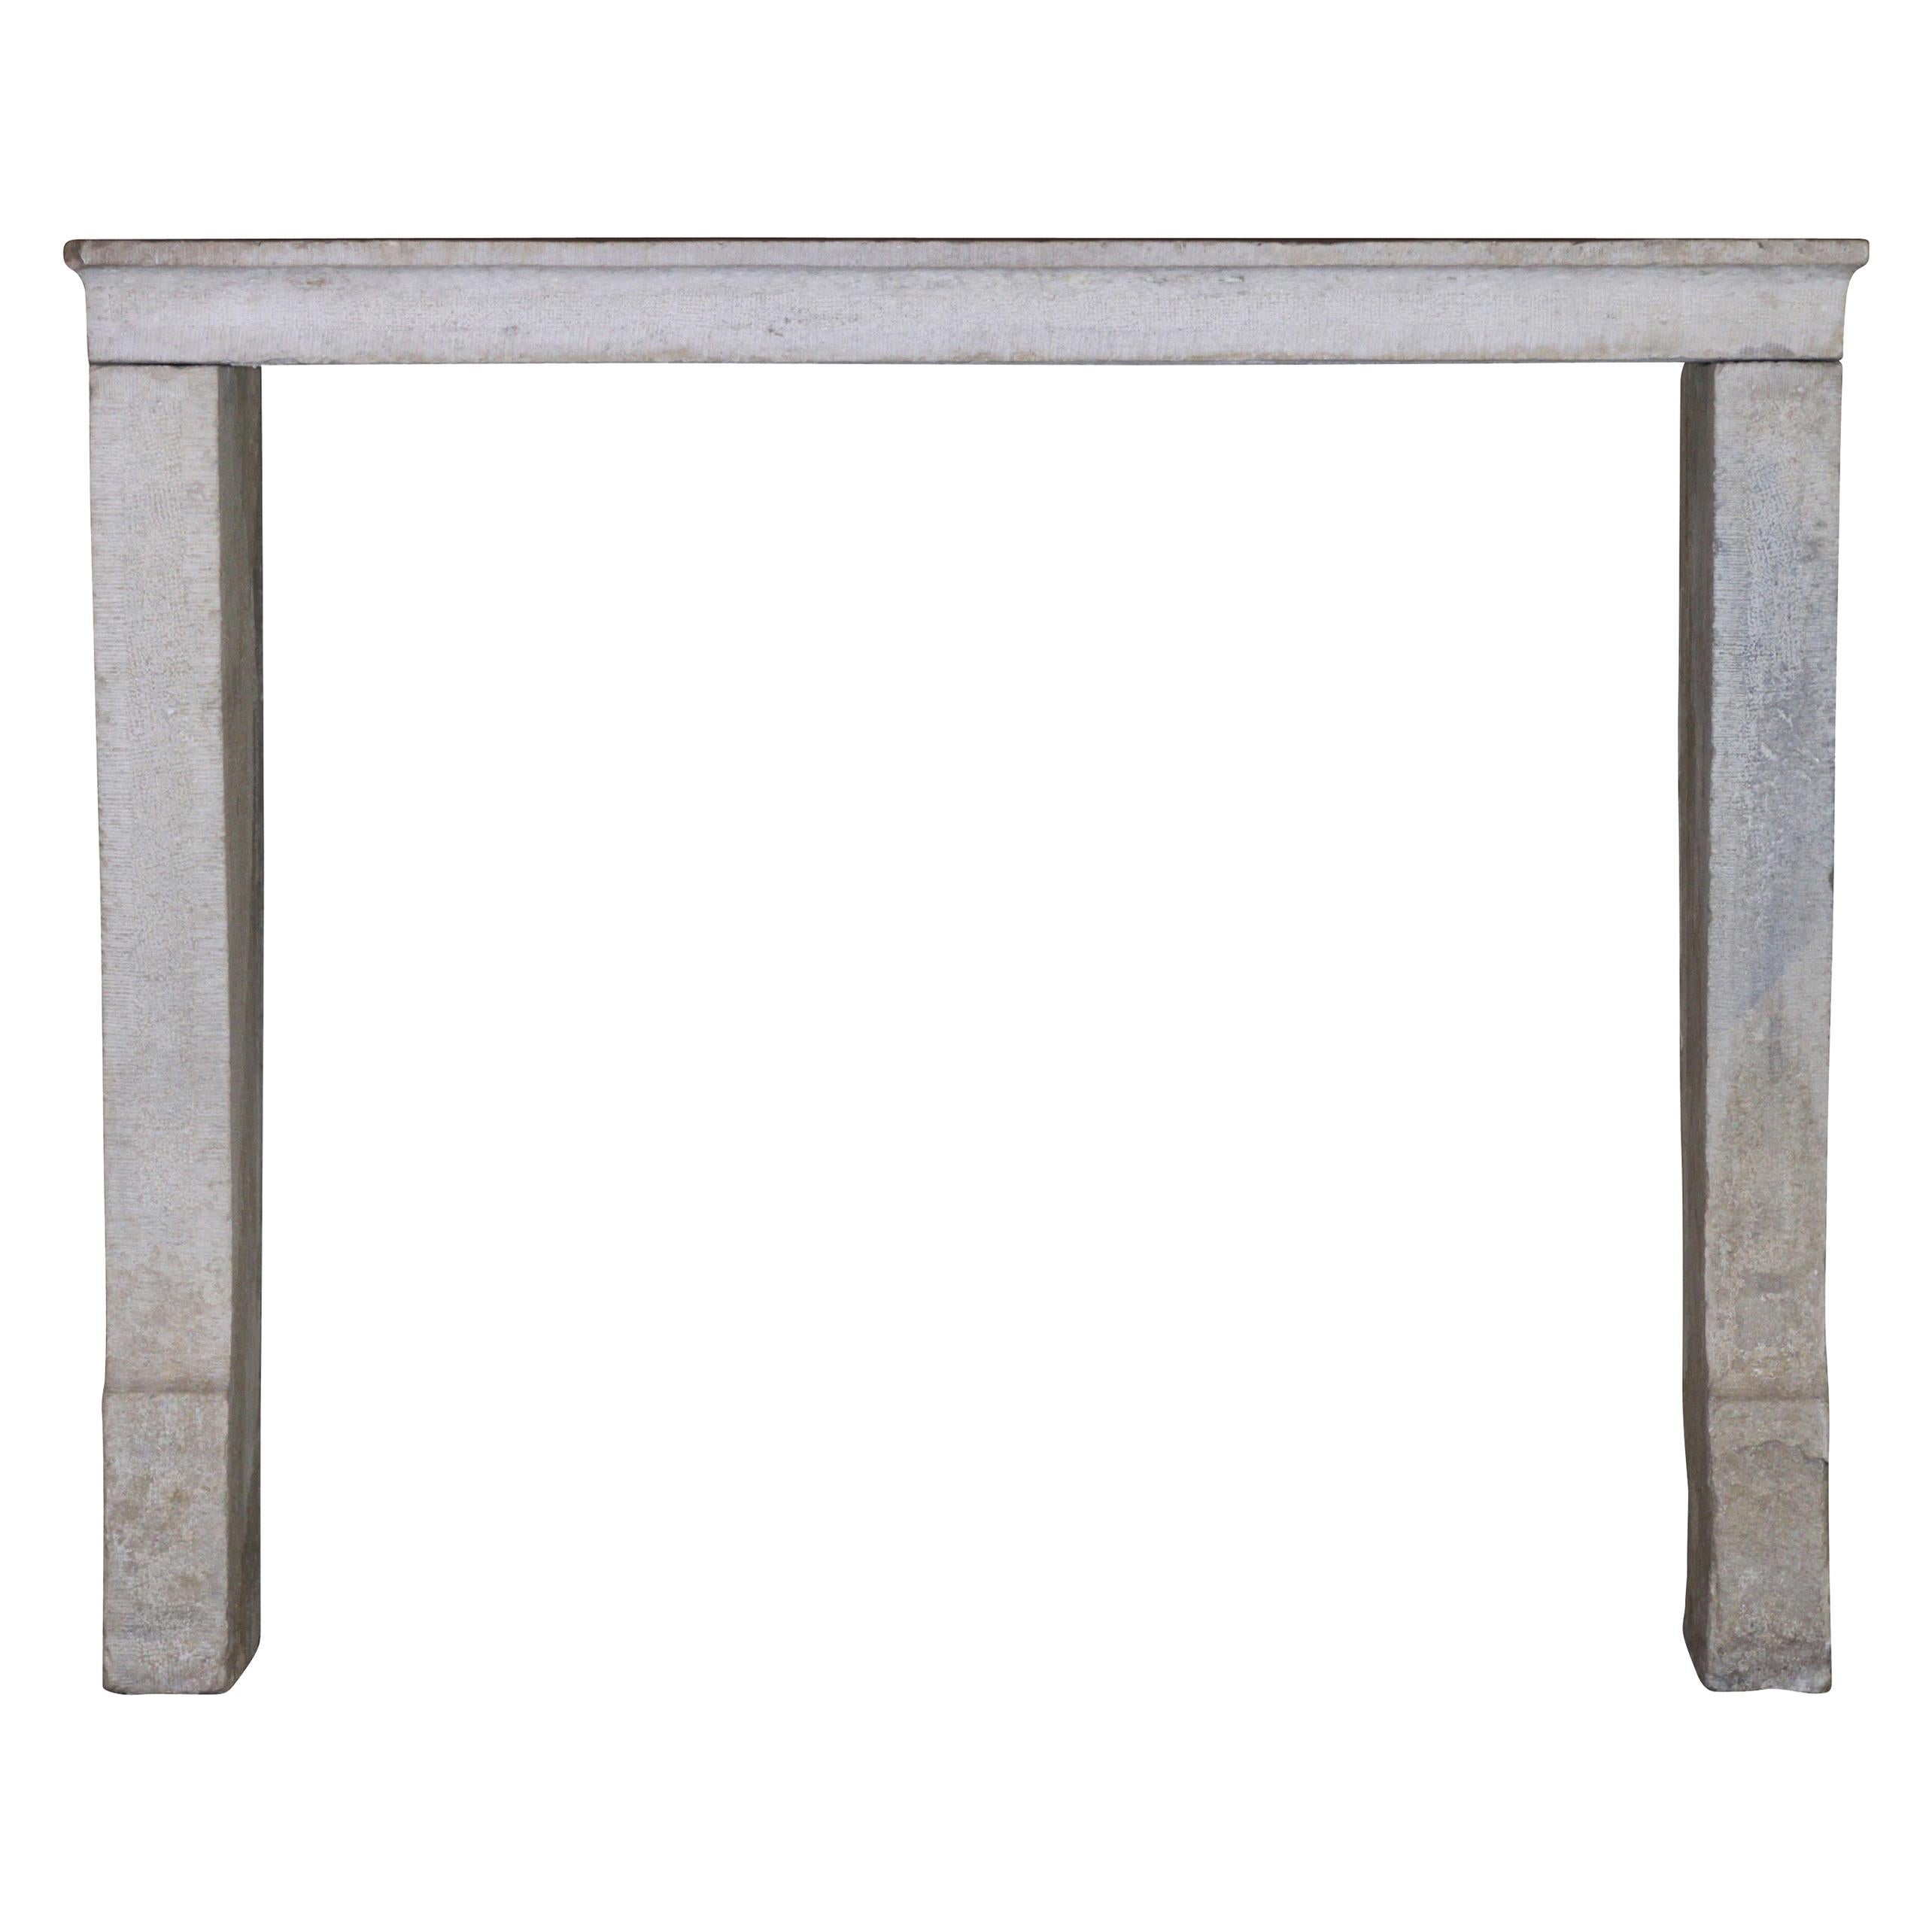 Small French Country Limestone Antique Fireplace Surround For Sale